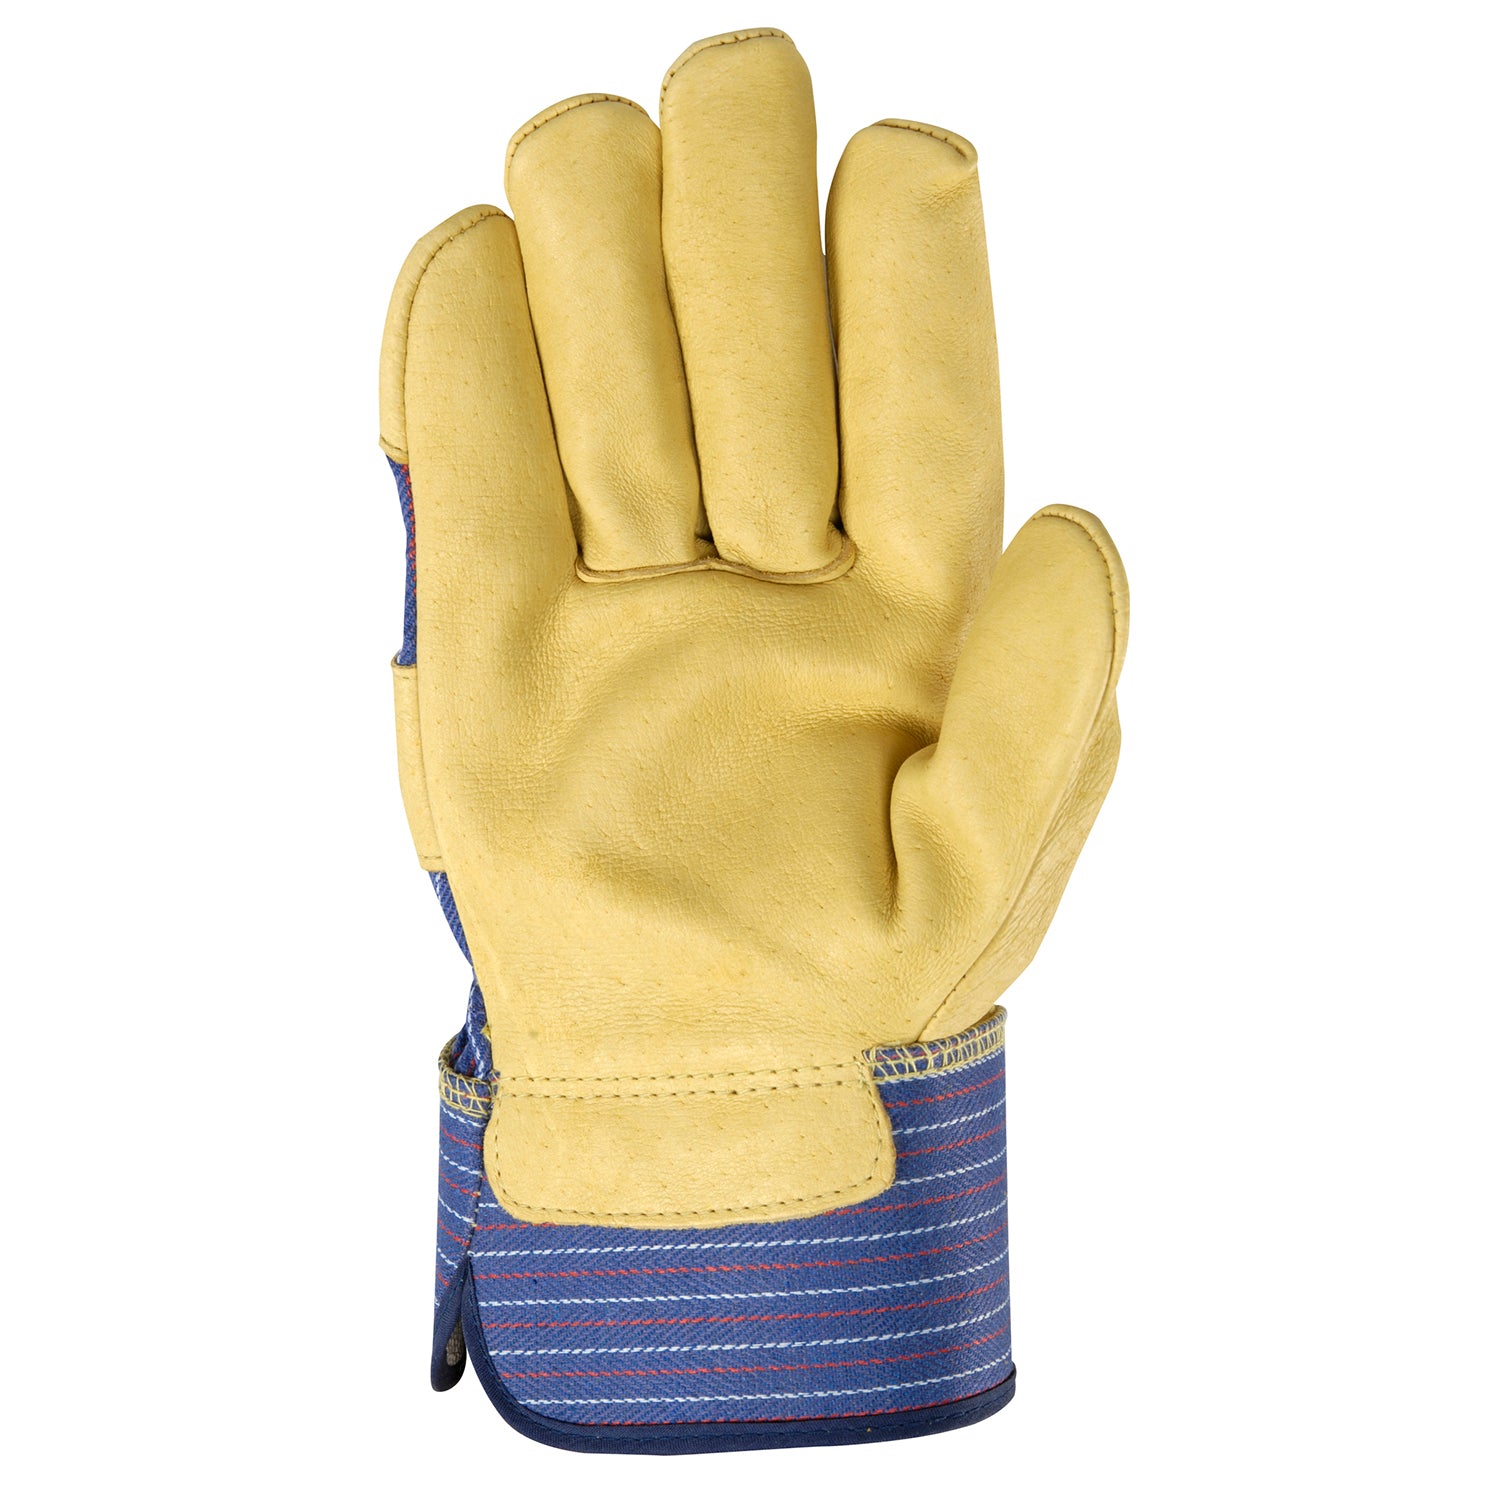 Wells Lamont Large Gold Leather Utility Gloves, (1-Pair) in the Work Gloves  department at